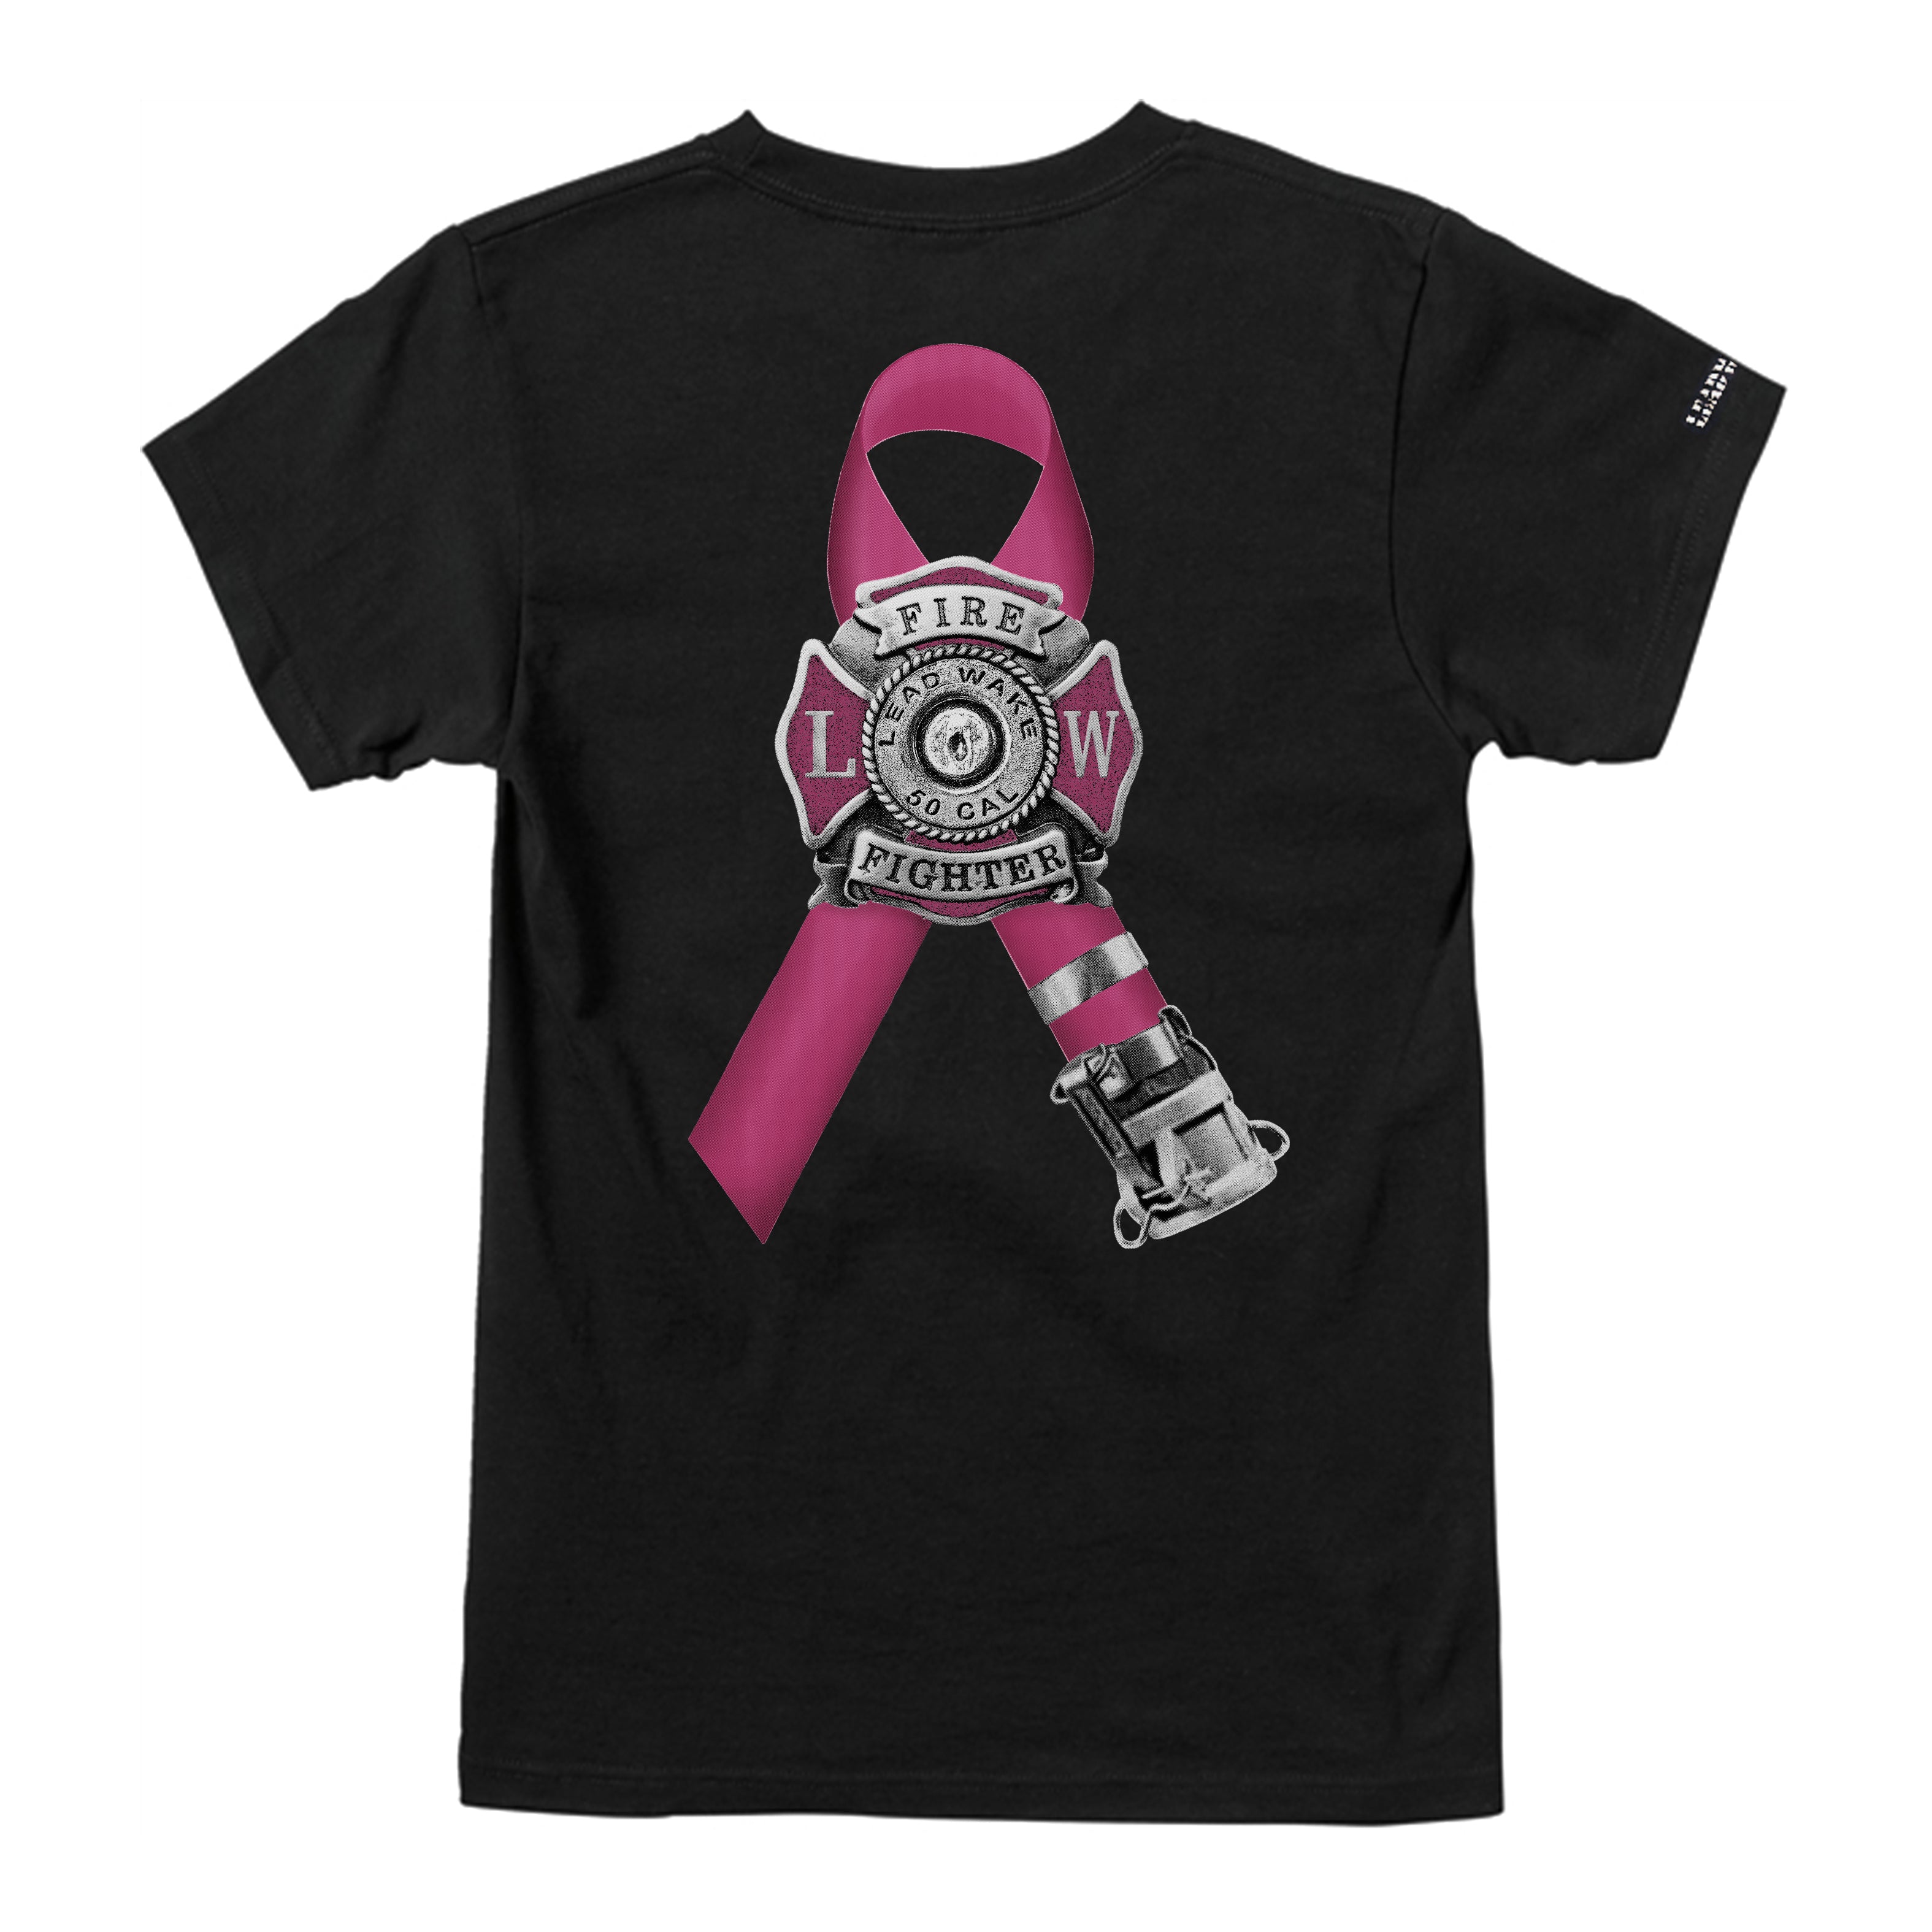 Women's Breast Cancer Awareness<br> T-Shirt in Black